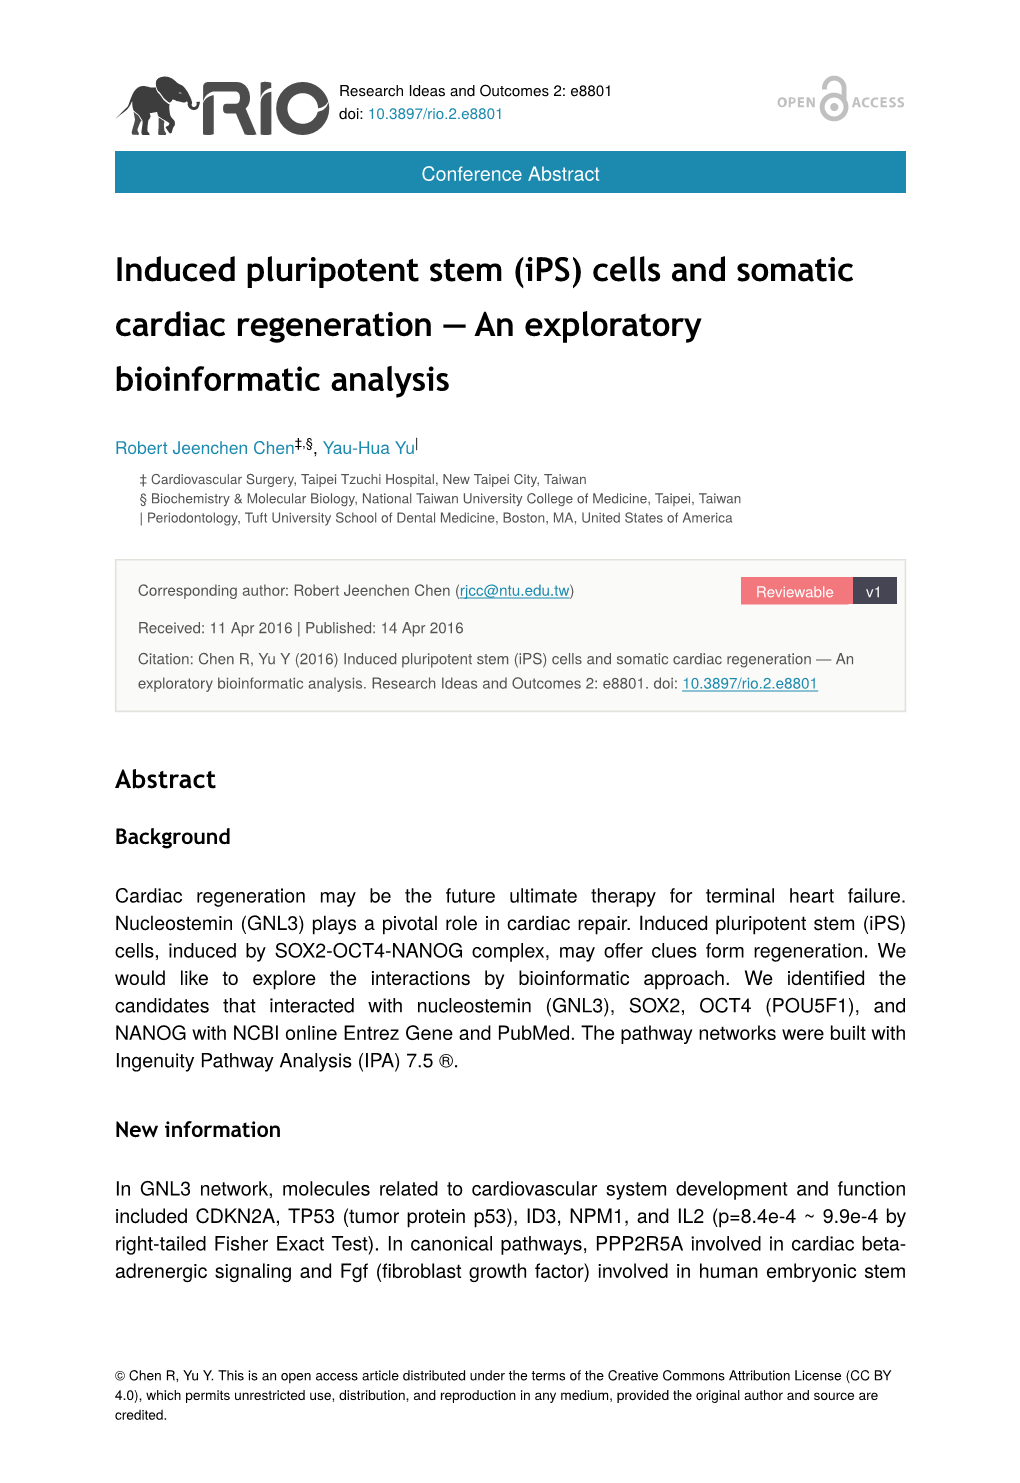 Induced Pluripotent Stem (Ips) Cells and Somatic Cardiac Regeneration — an Exploratory Bioinformatic Analysis